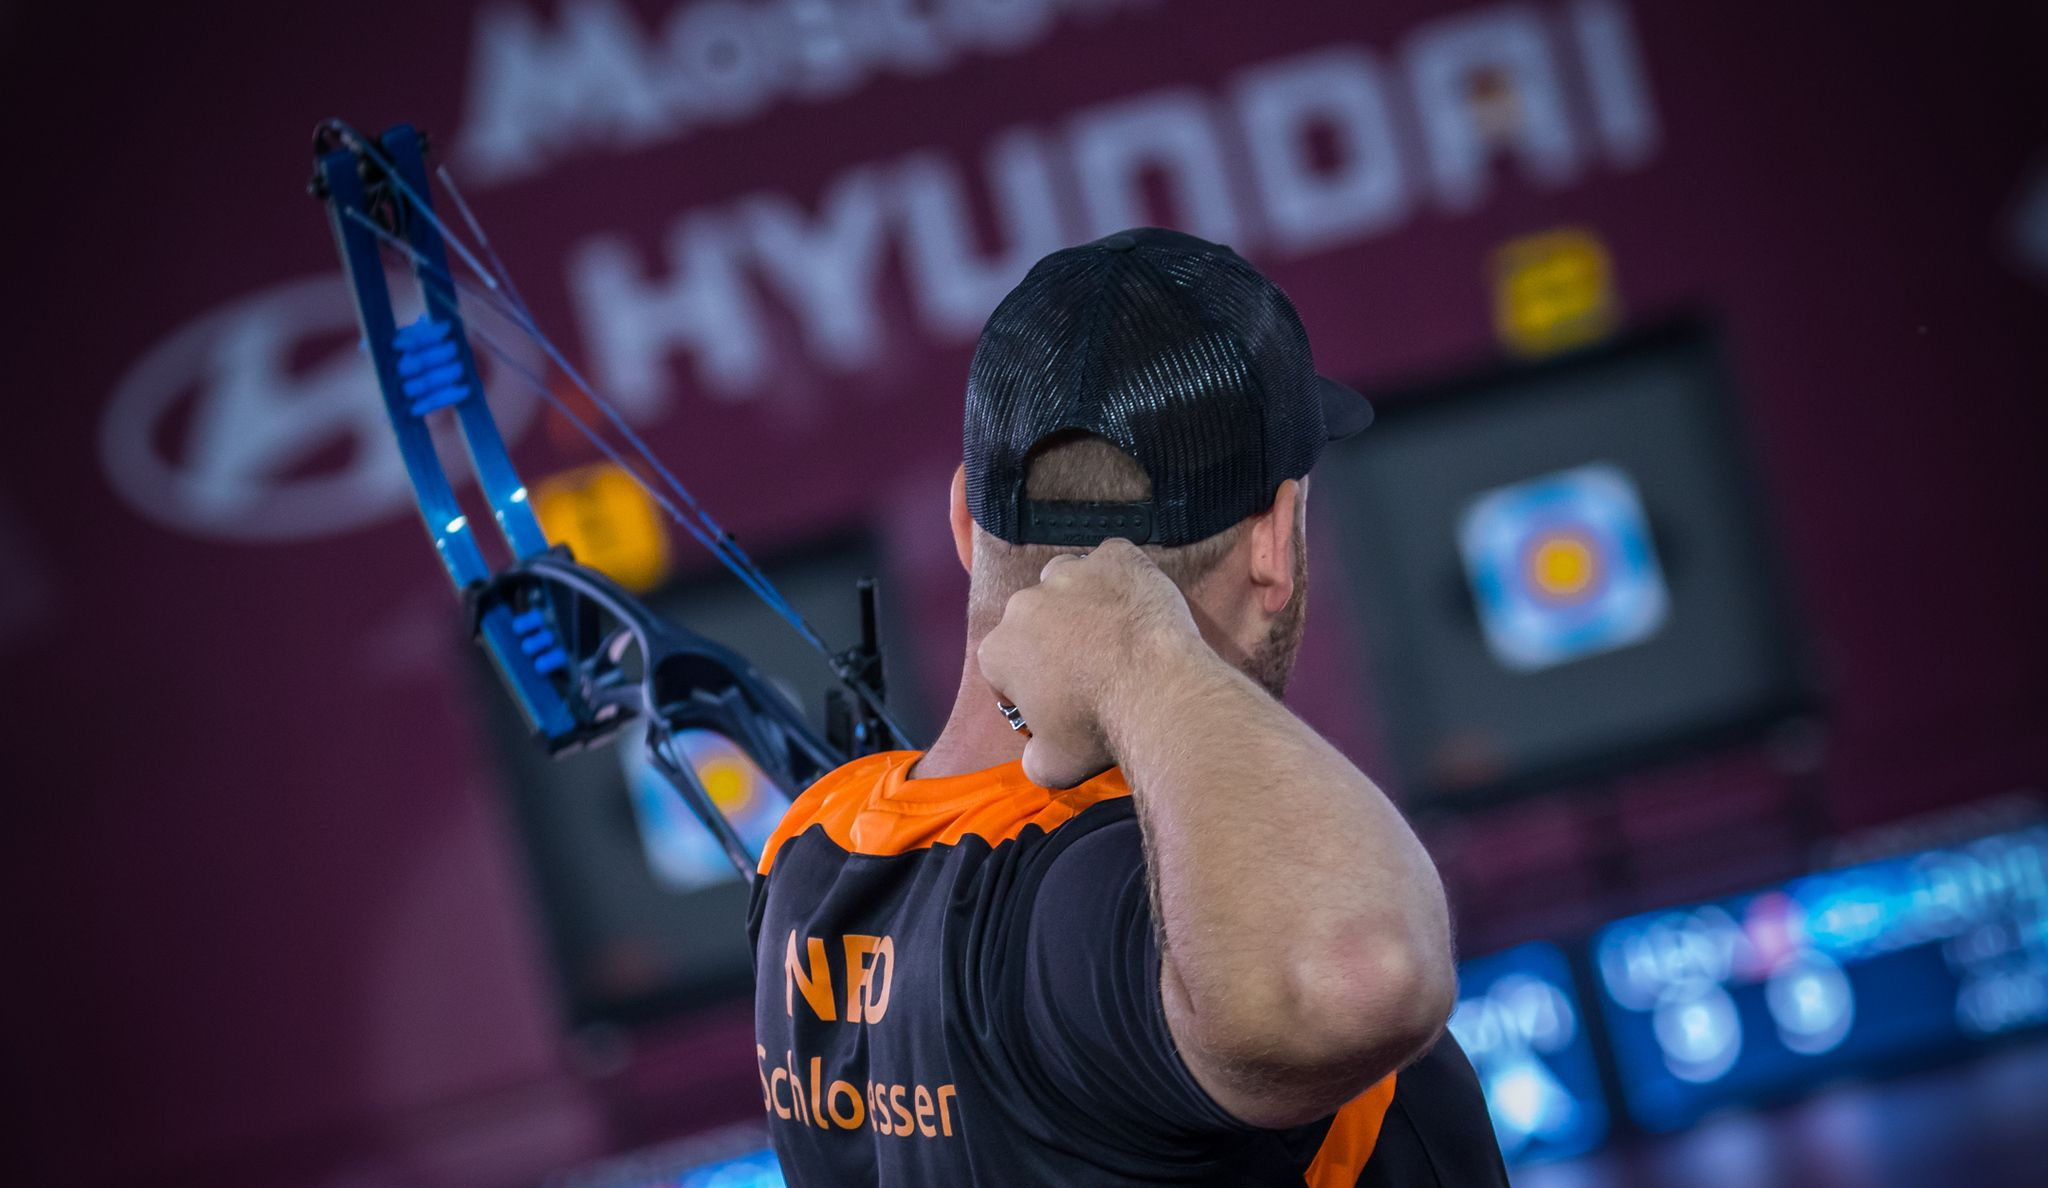 Schloesser and Lopez win compound crowns at Archery World Cup Final